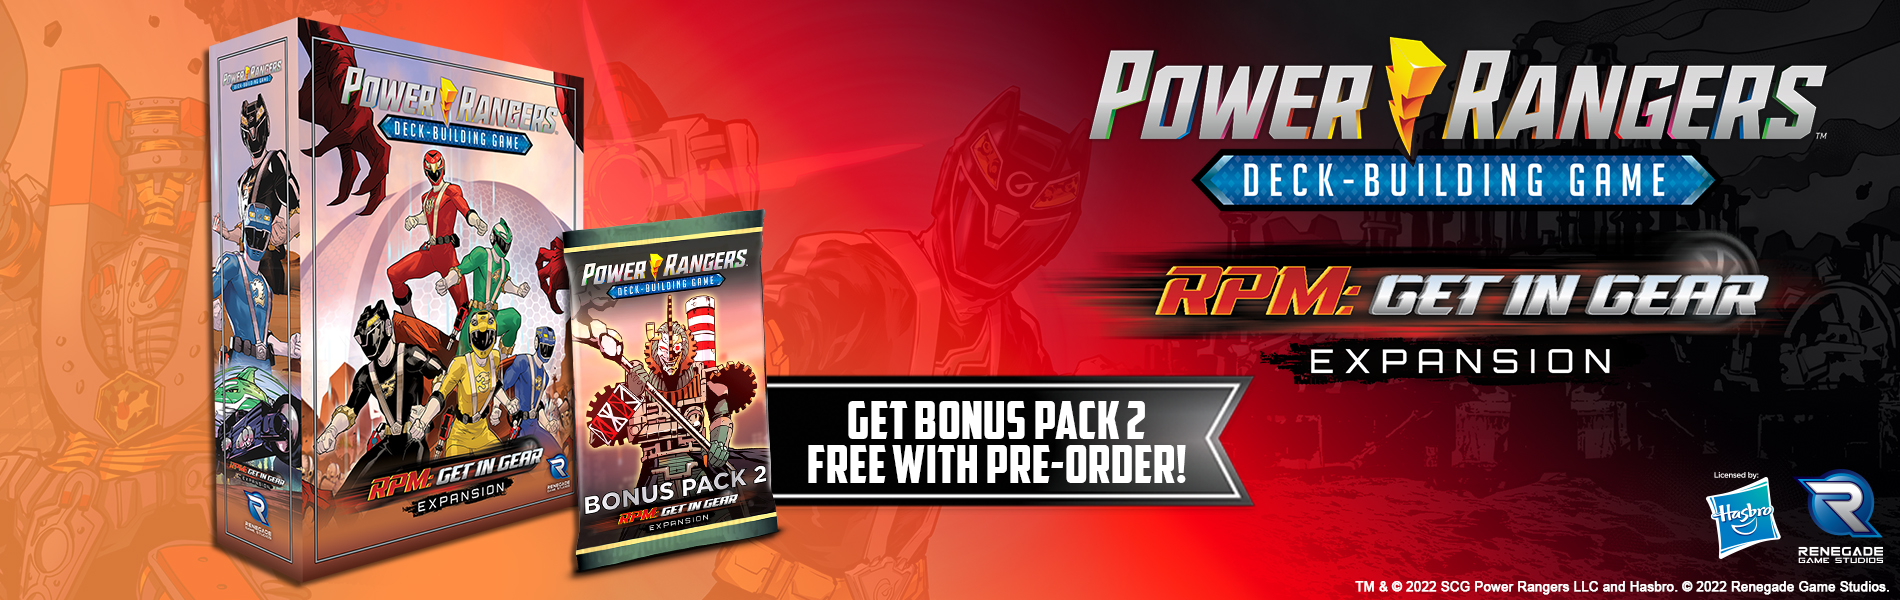 RPM Get In Gear Expansion Promo - Power Rangers Deck Building Game